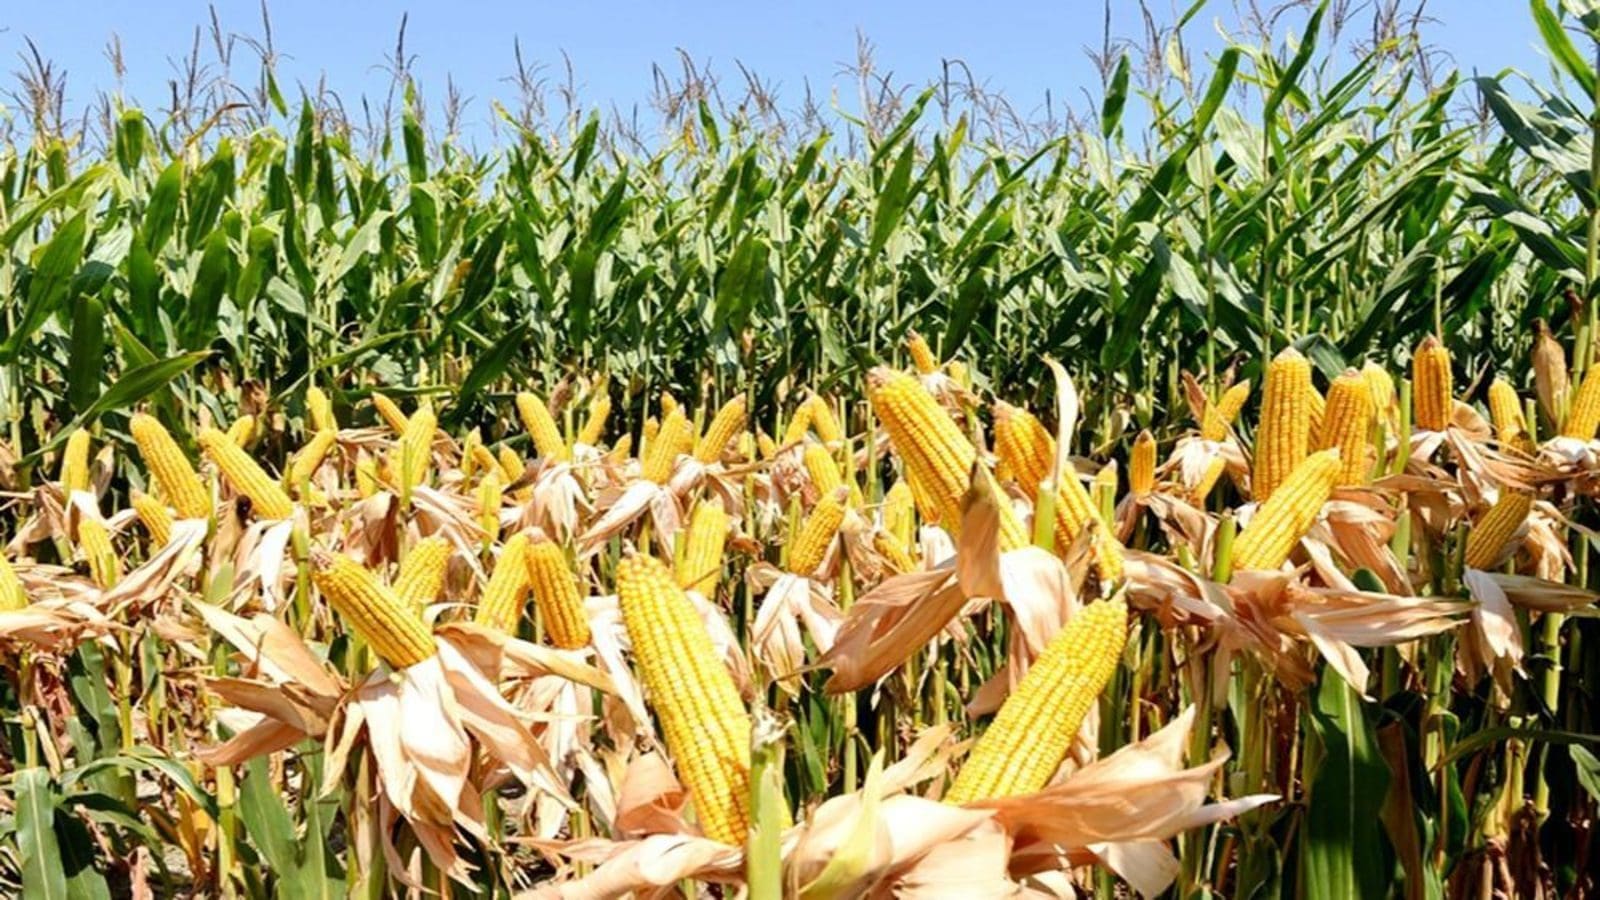 Madagascar signs deal with the Zimbabwean seed company to produce new high-yield maize seeds